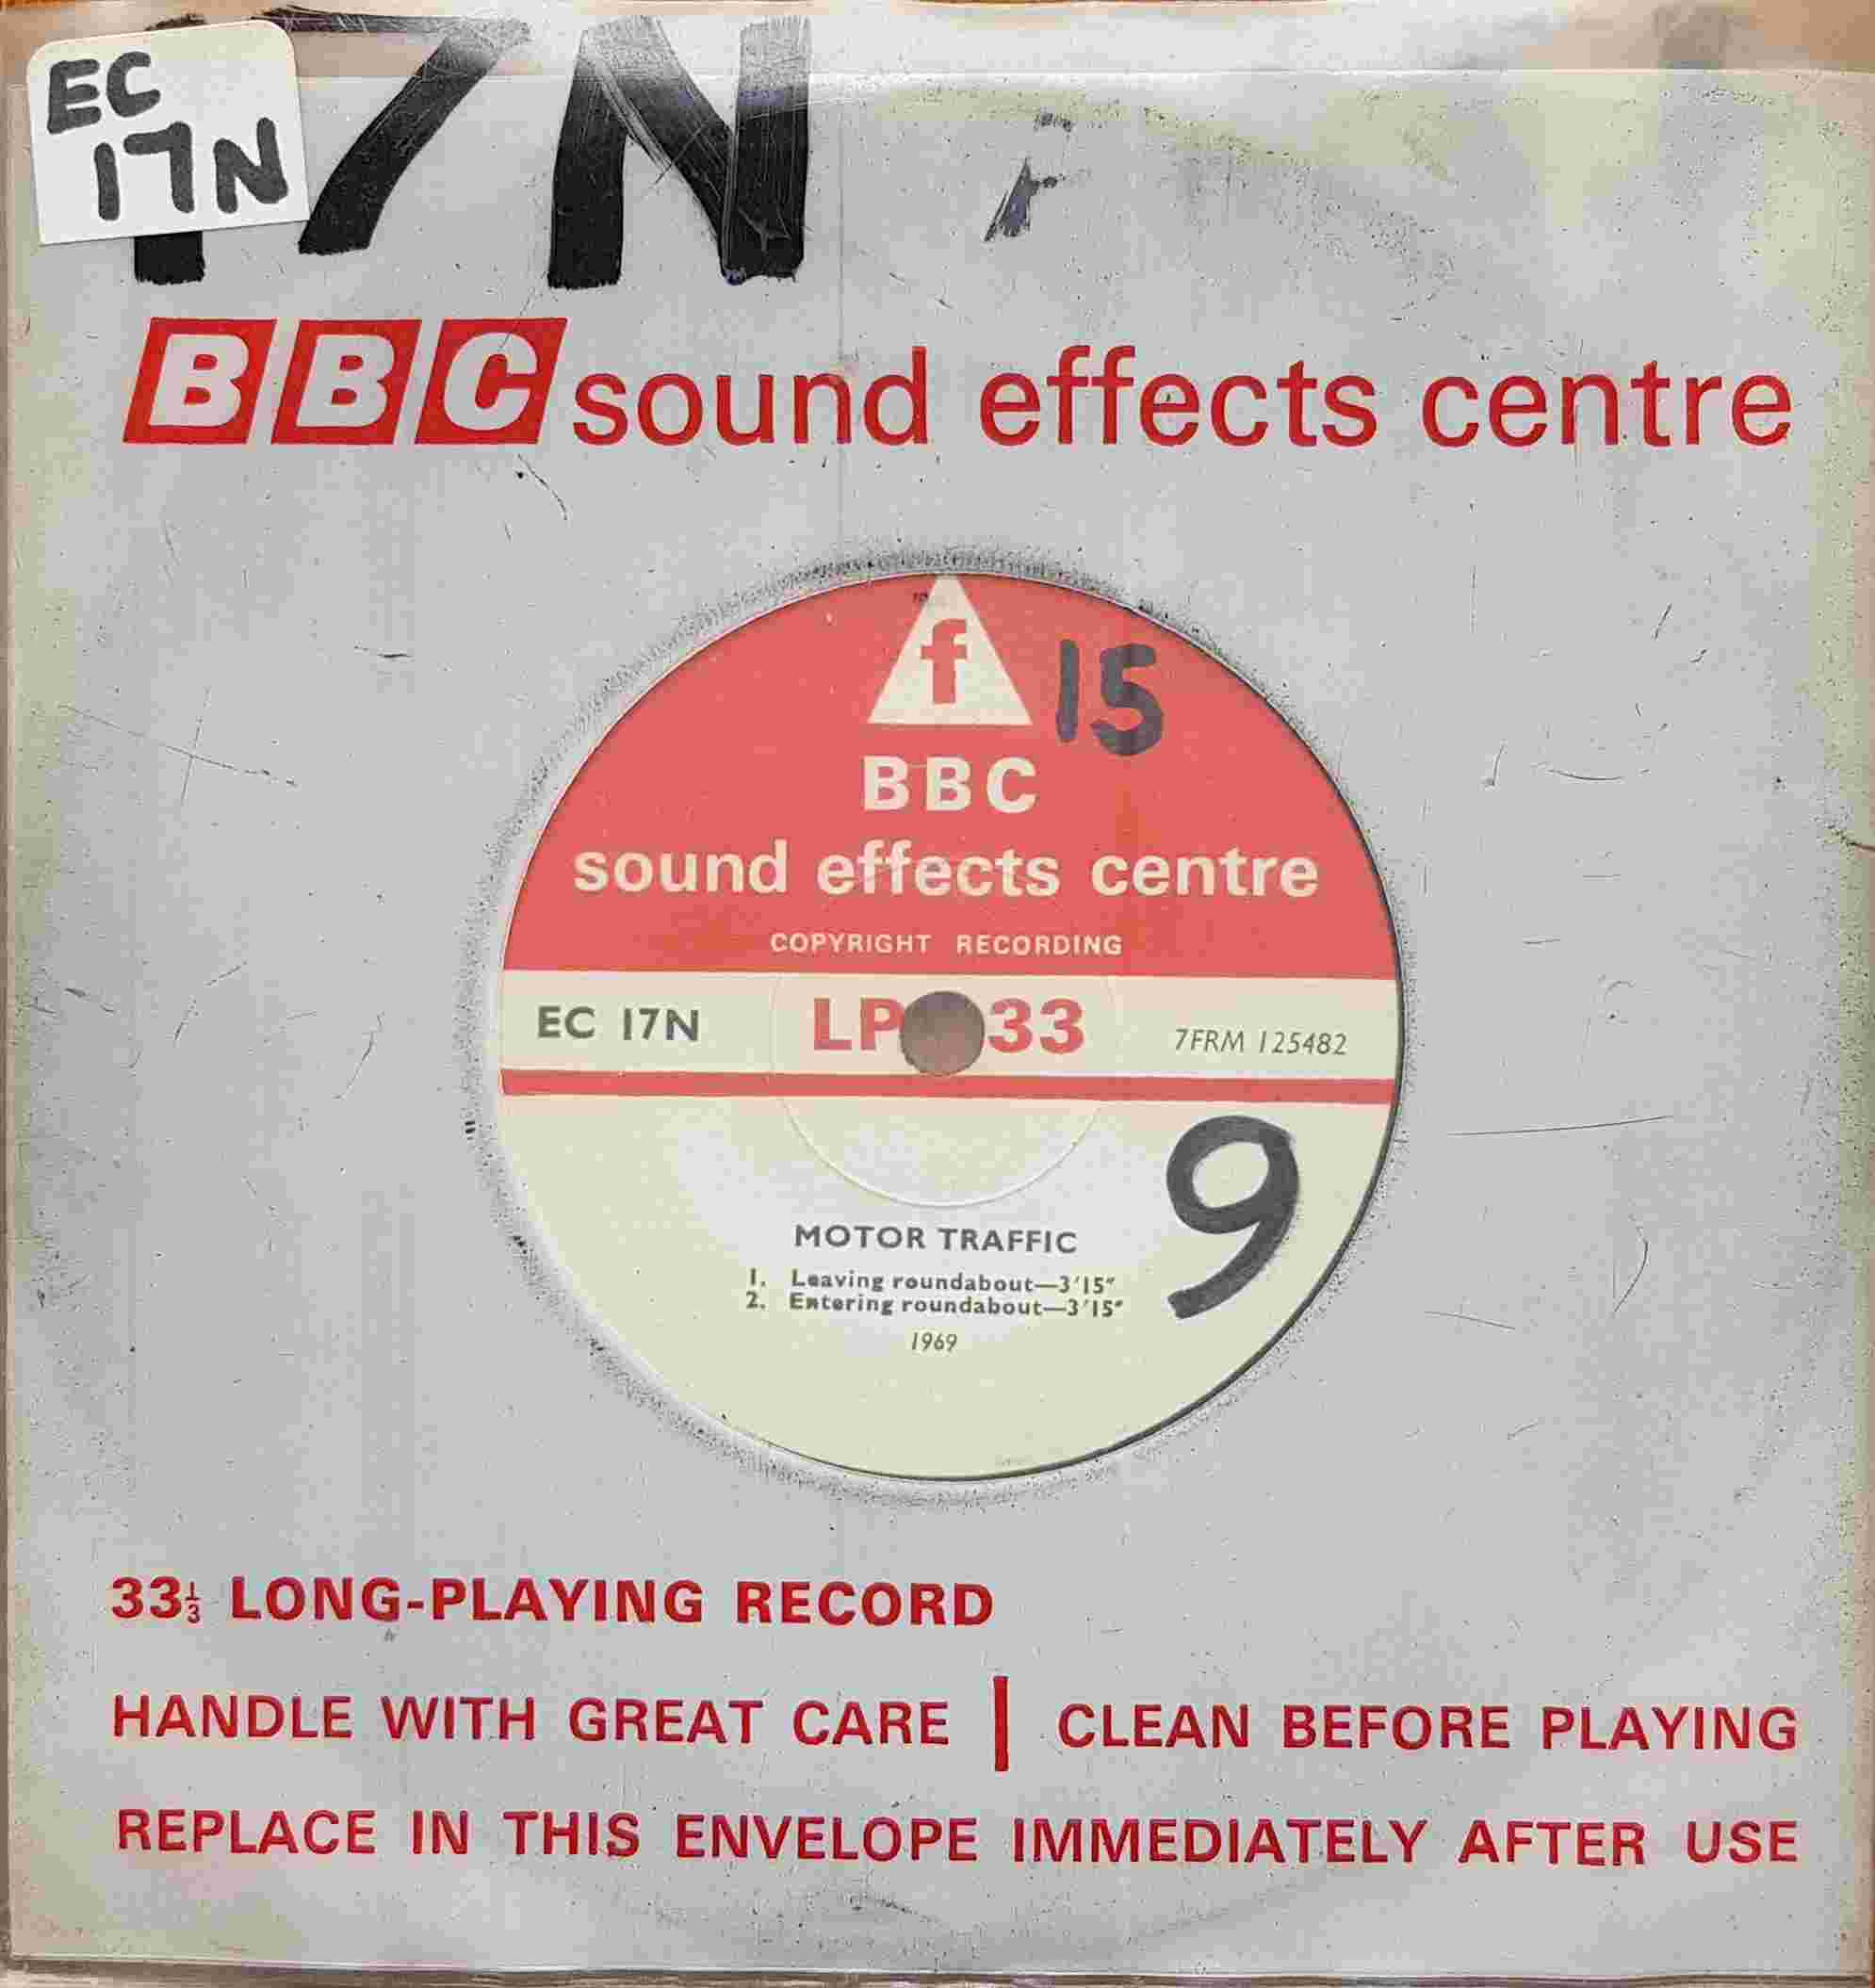 Picture of EC 17N Motor traffic by artist Not registered from the BBC records and Tapes library